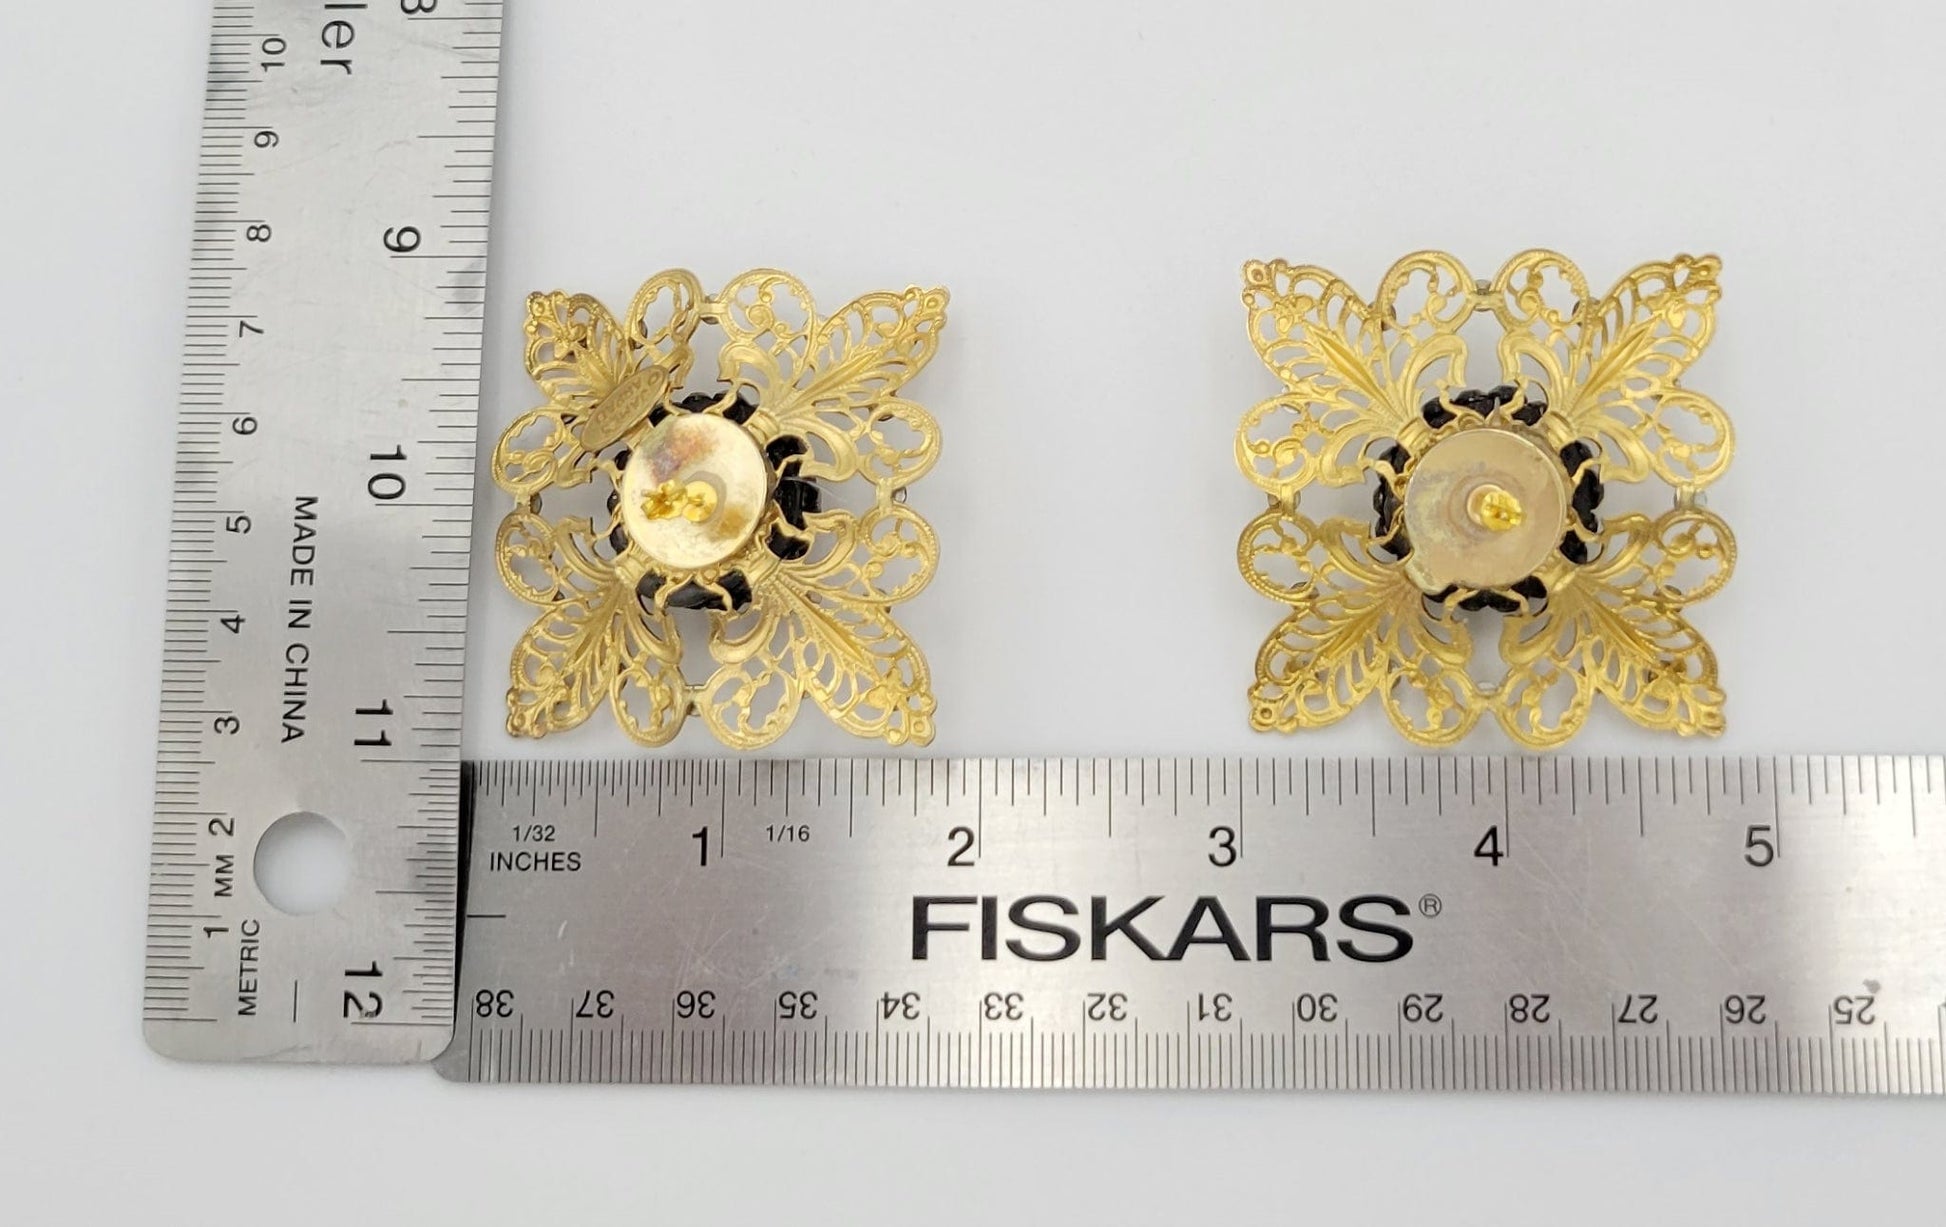 James Arpad Jewelry James Arpad France Gold & Black Crystals Flower Couture Runway Earrings 1980s